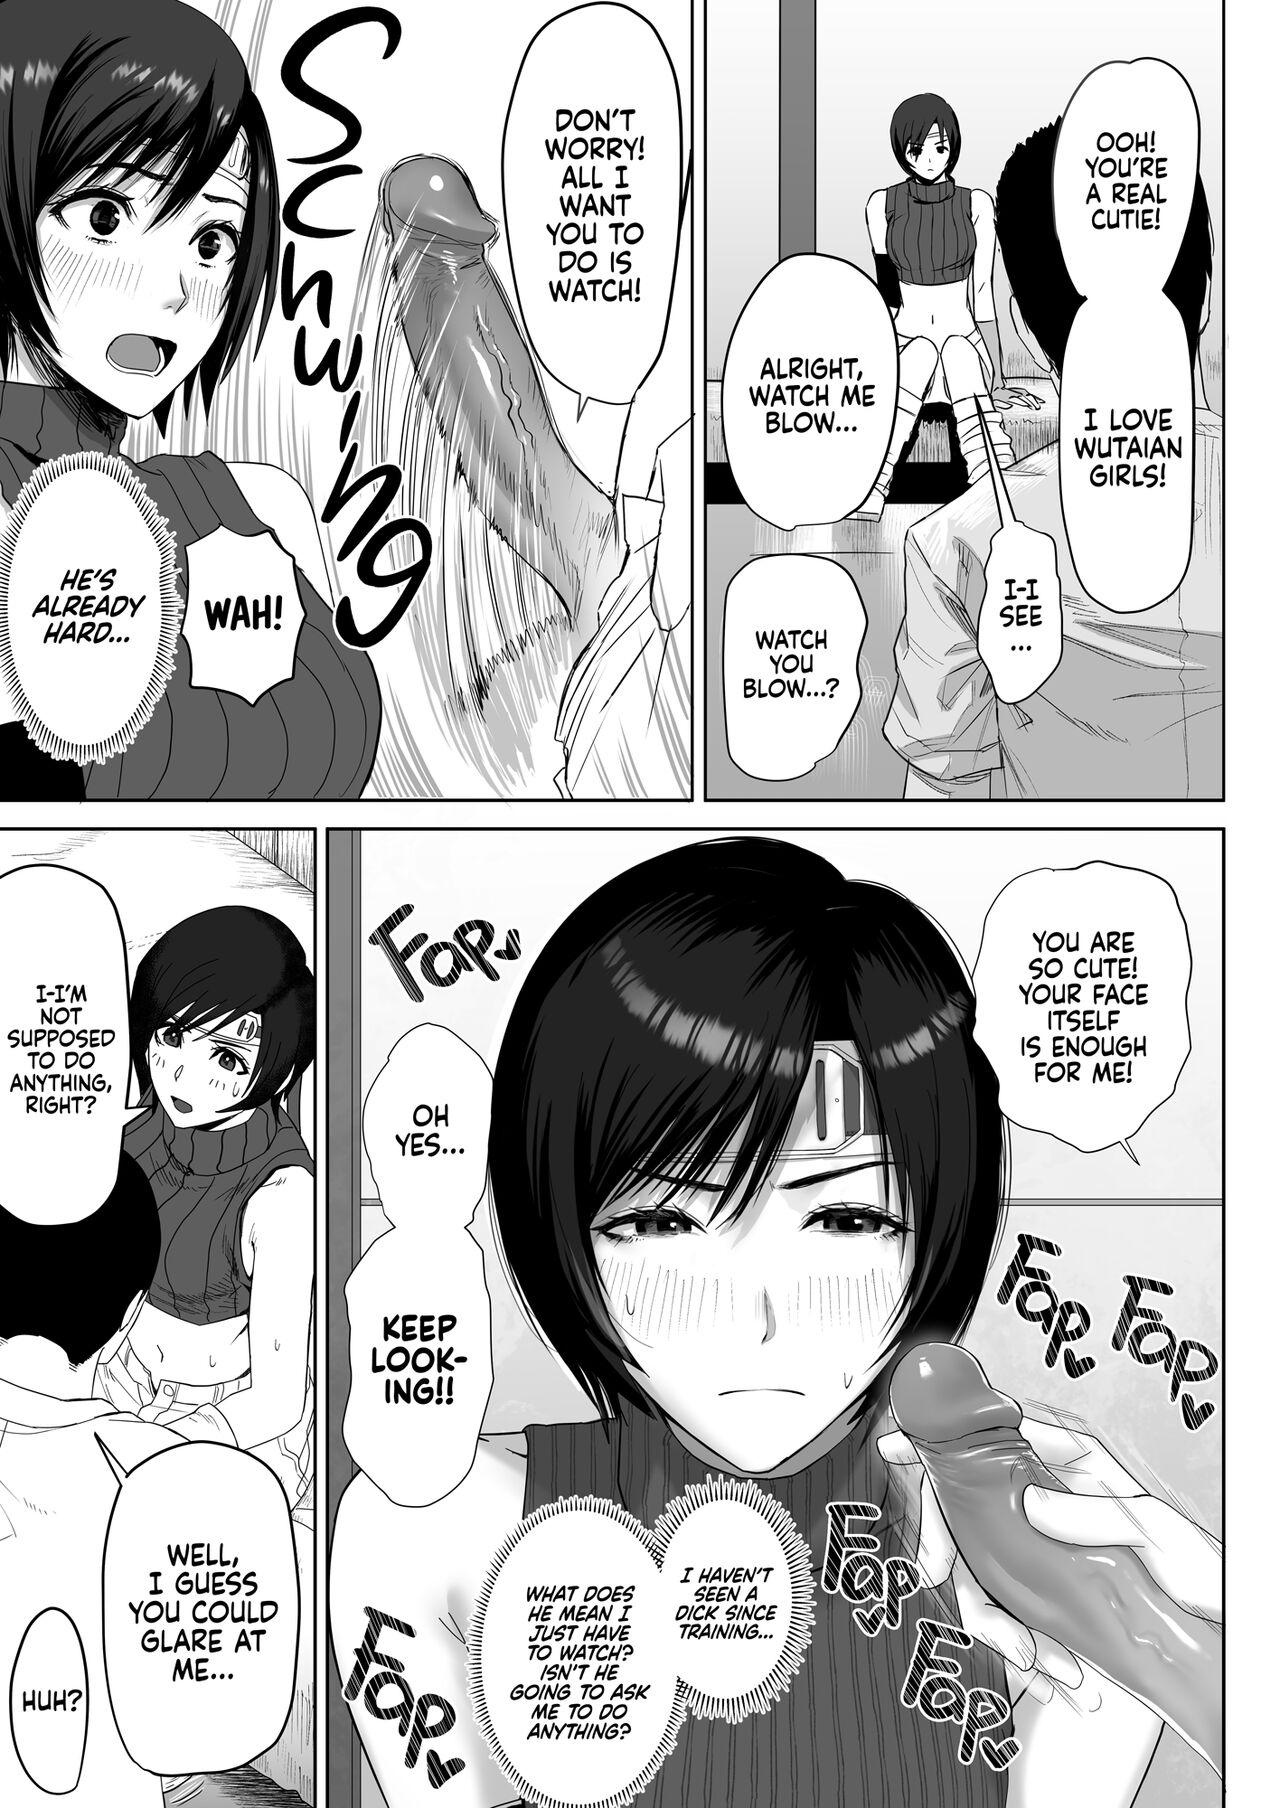 Naked Oniisan Wutai Musume Doudesuka? | What Do You Think of Wutaian Girls, Mister? - Final fantasy vii Red - Page 5